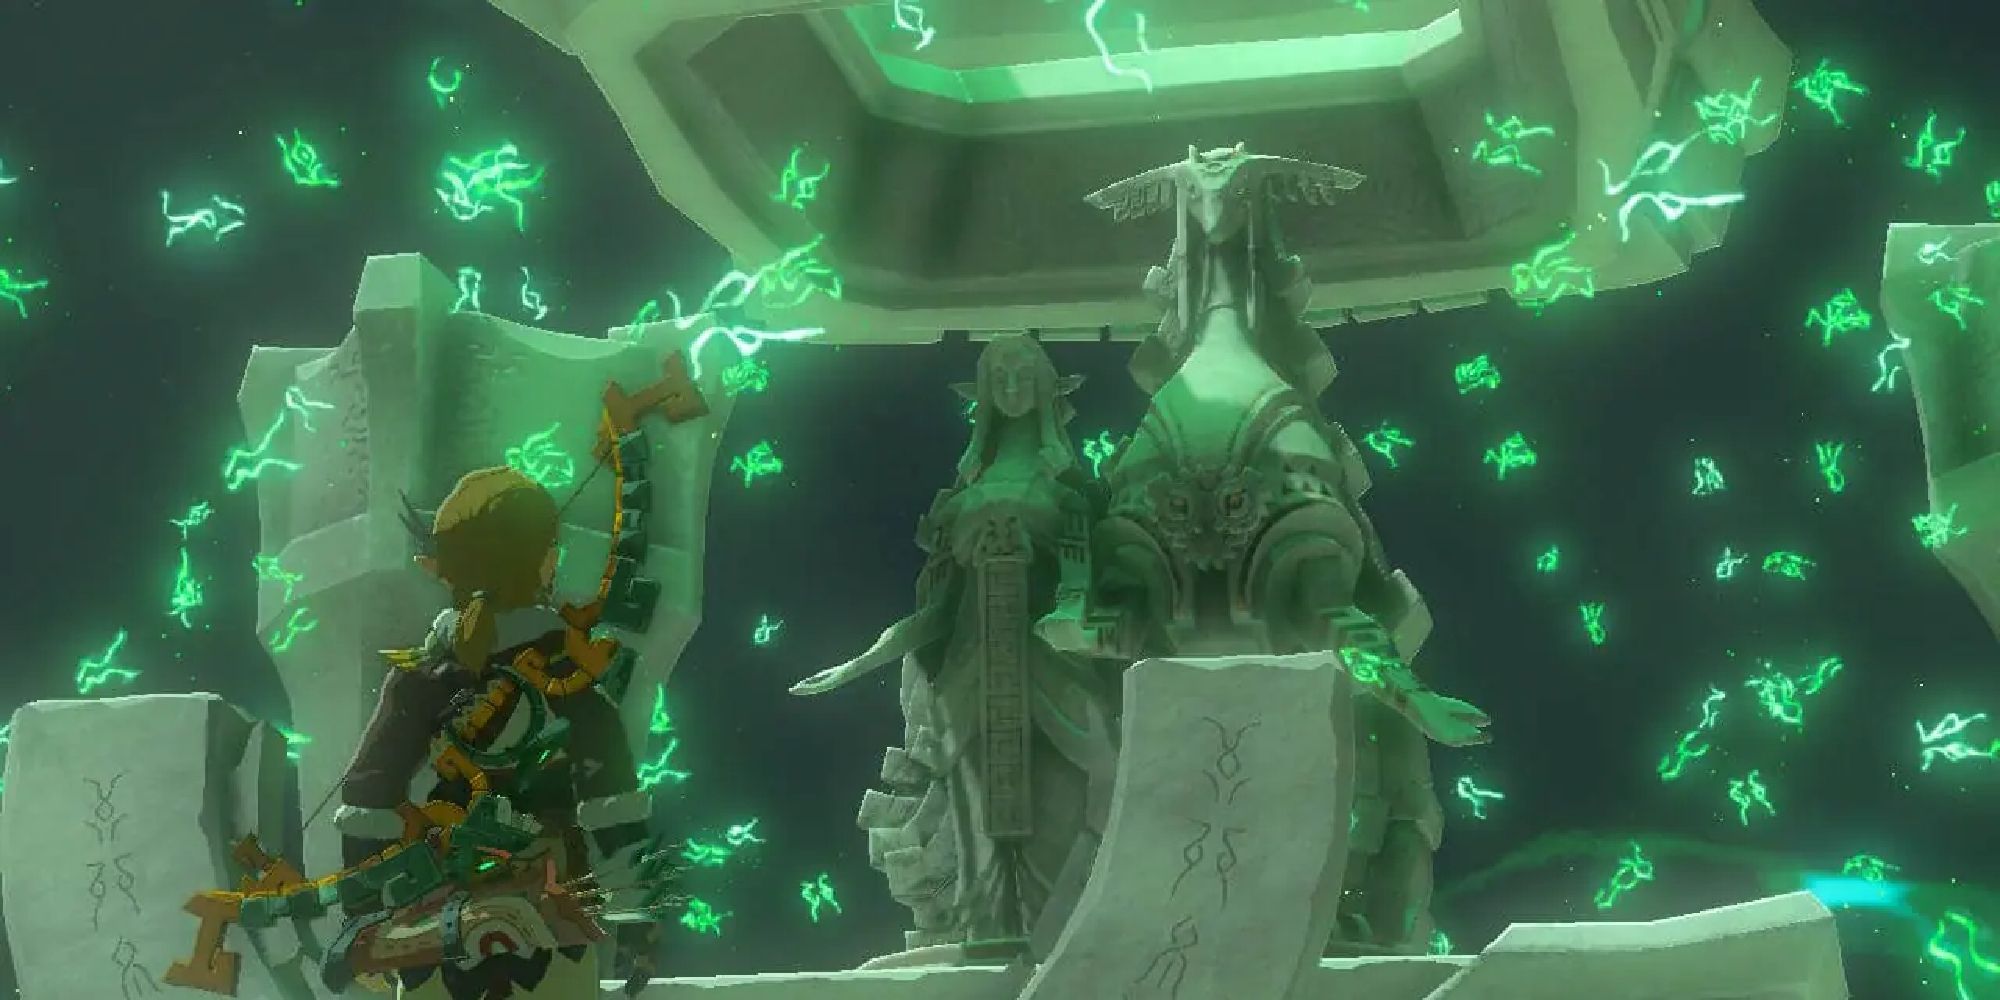 Link having reached the end of the Shrine, ready to receive the Shrine's blessing.